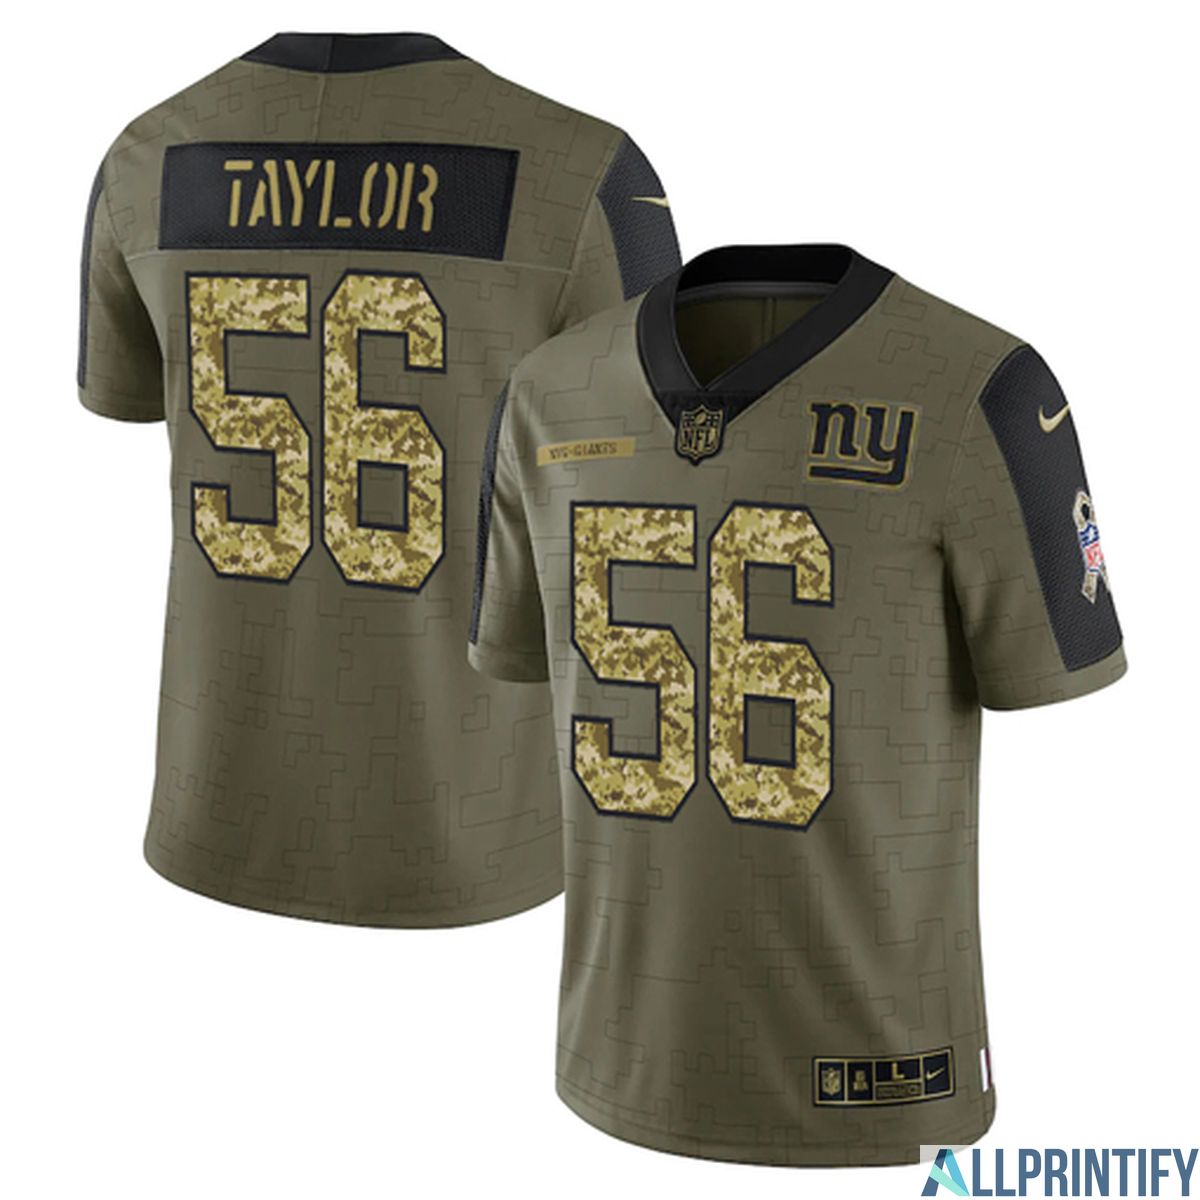 lawrence taylor jersey authentic